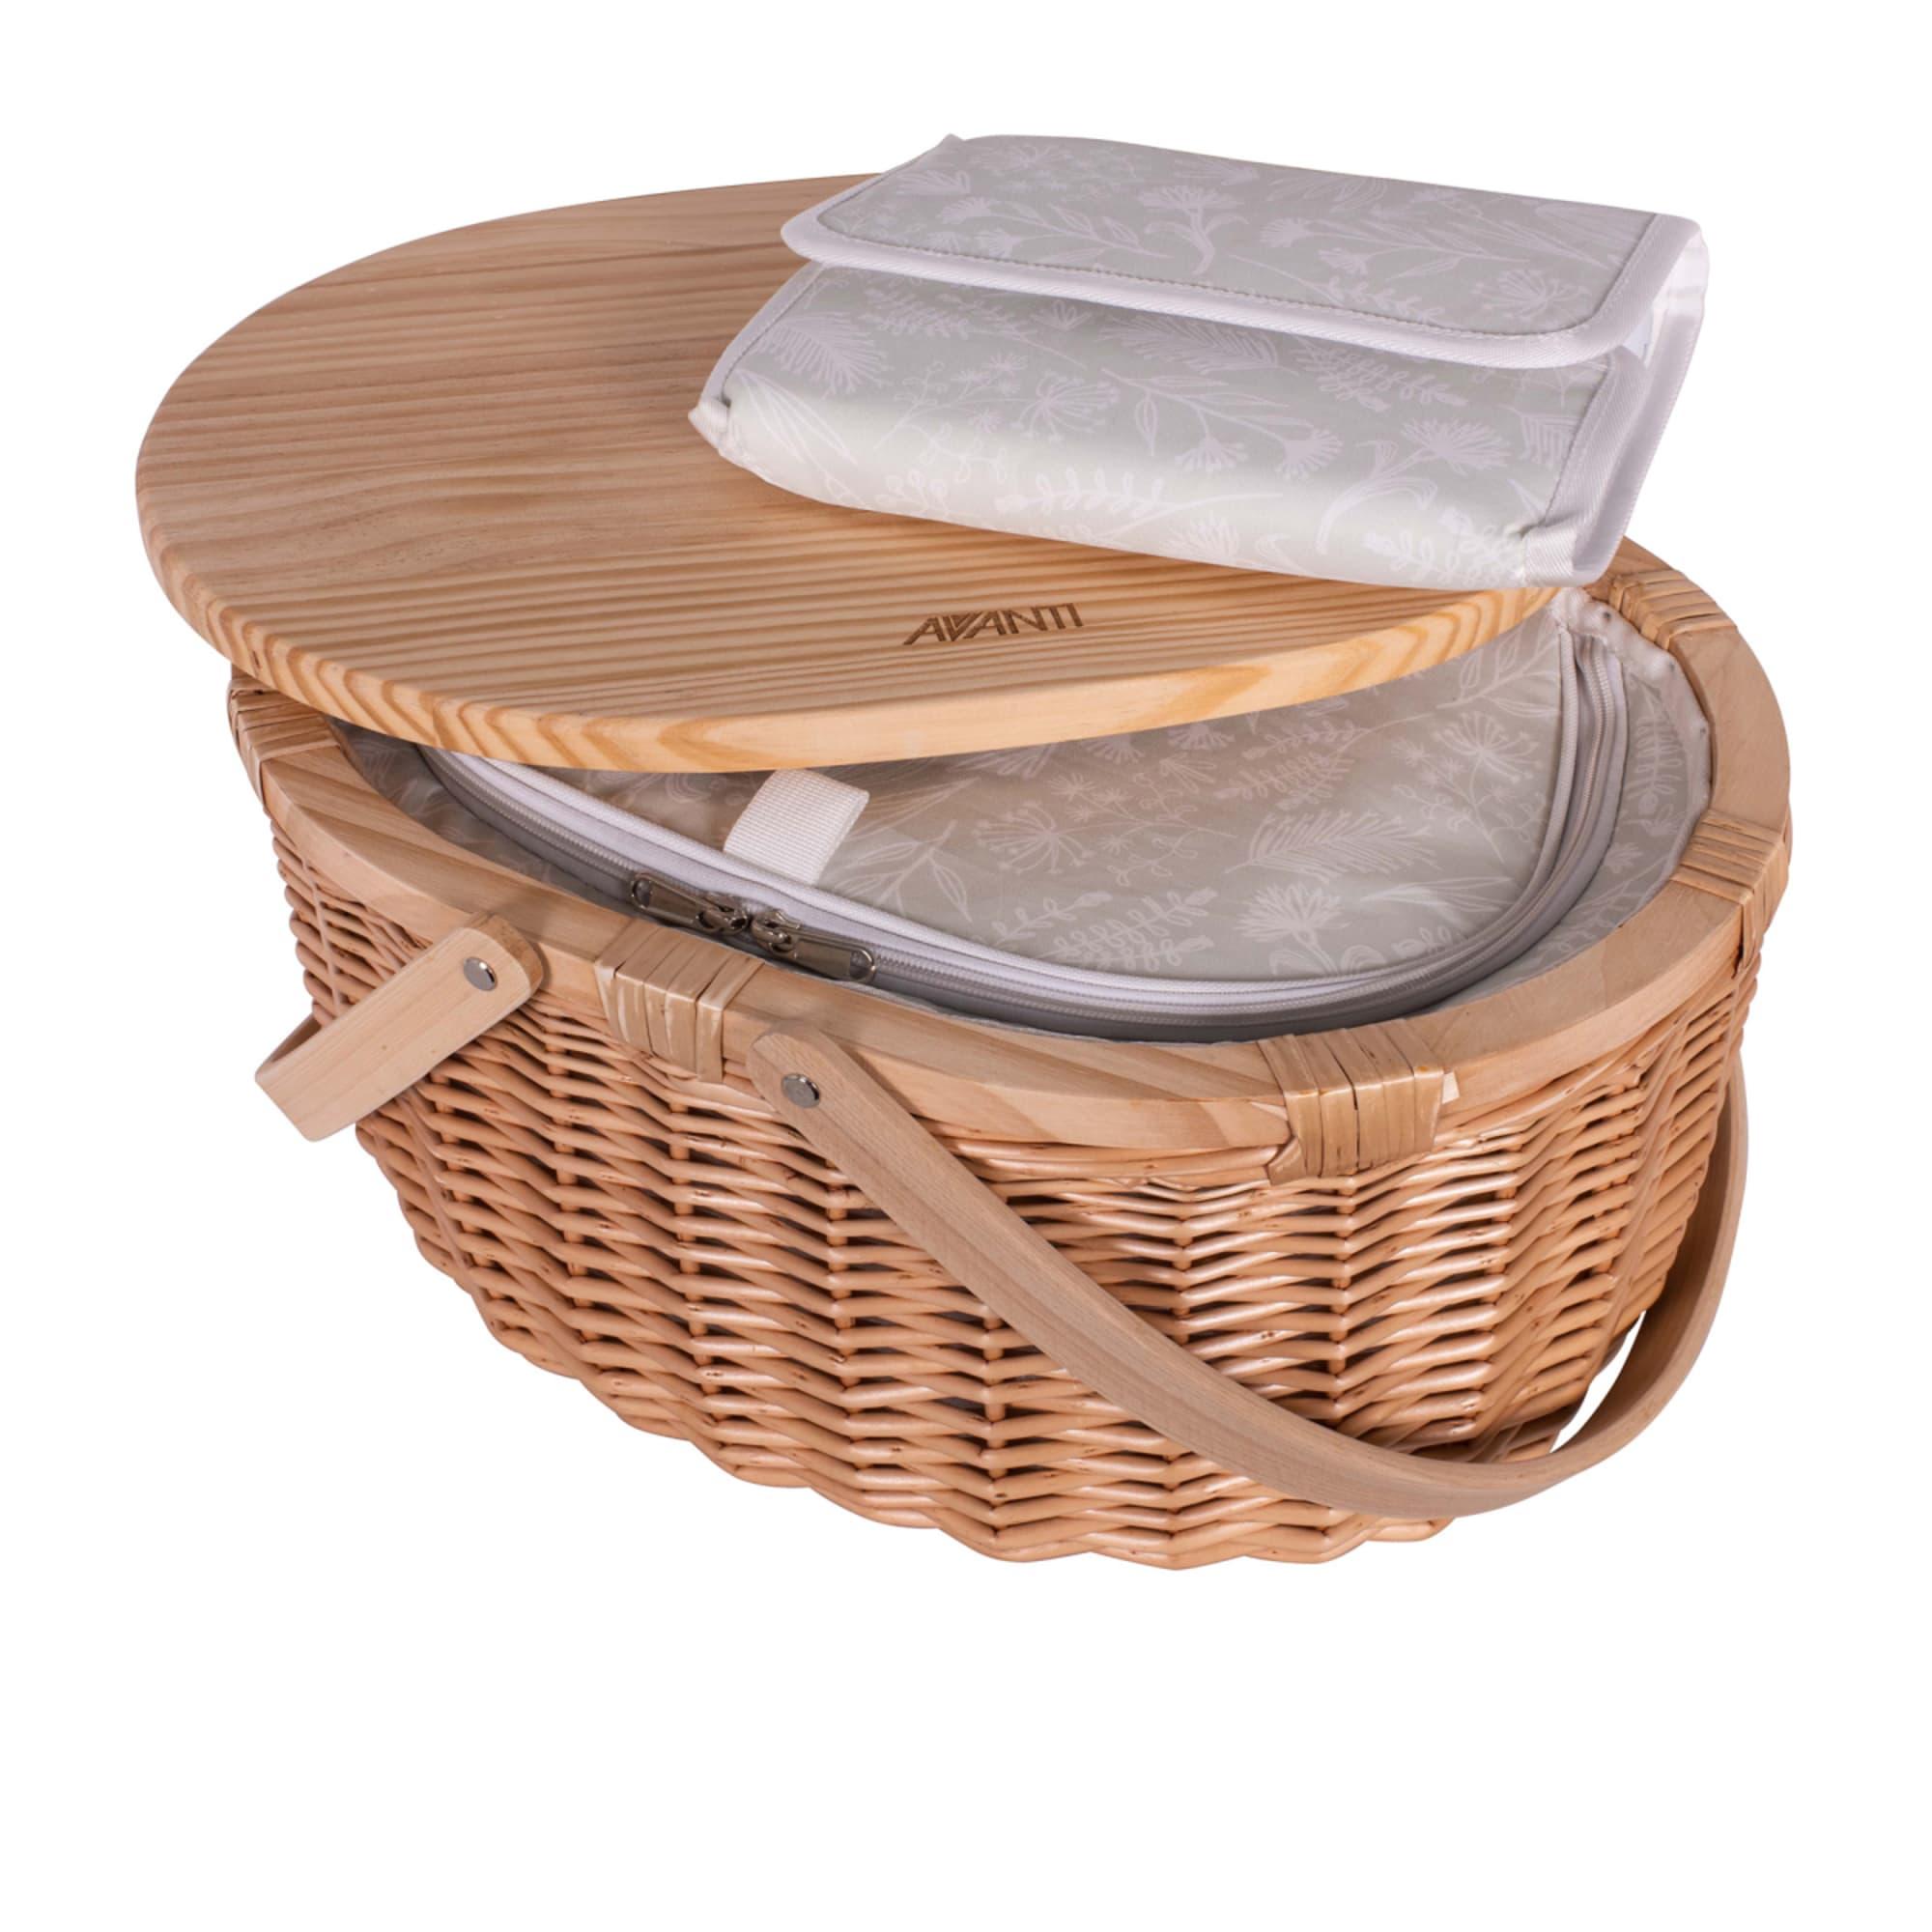 Avanti Pinewood Top Insulated Picnic Basket 2 Person Flora Image 3